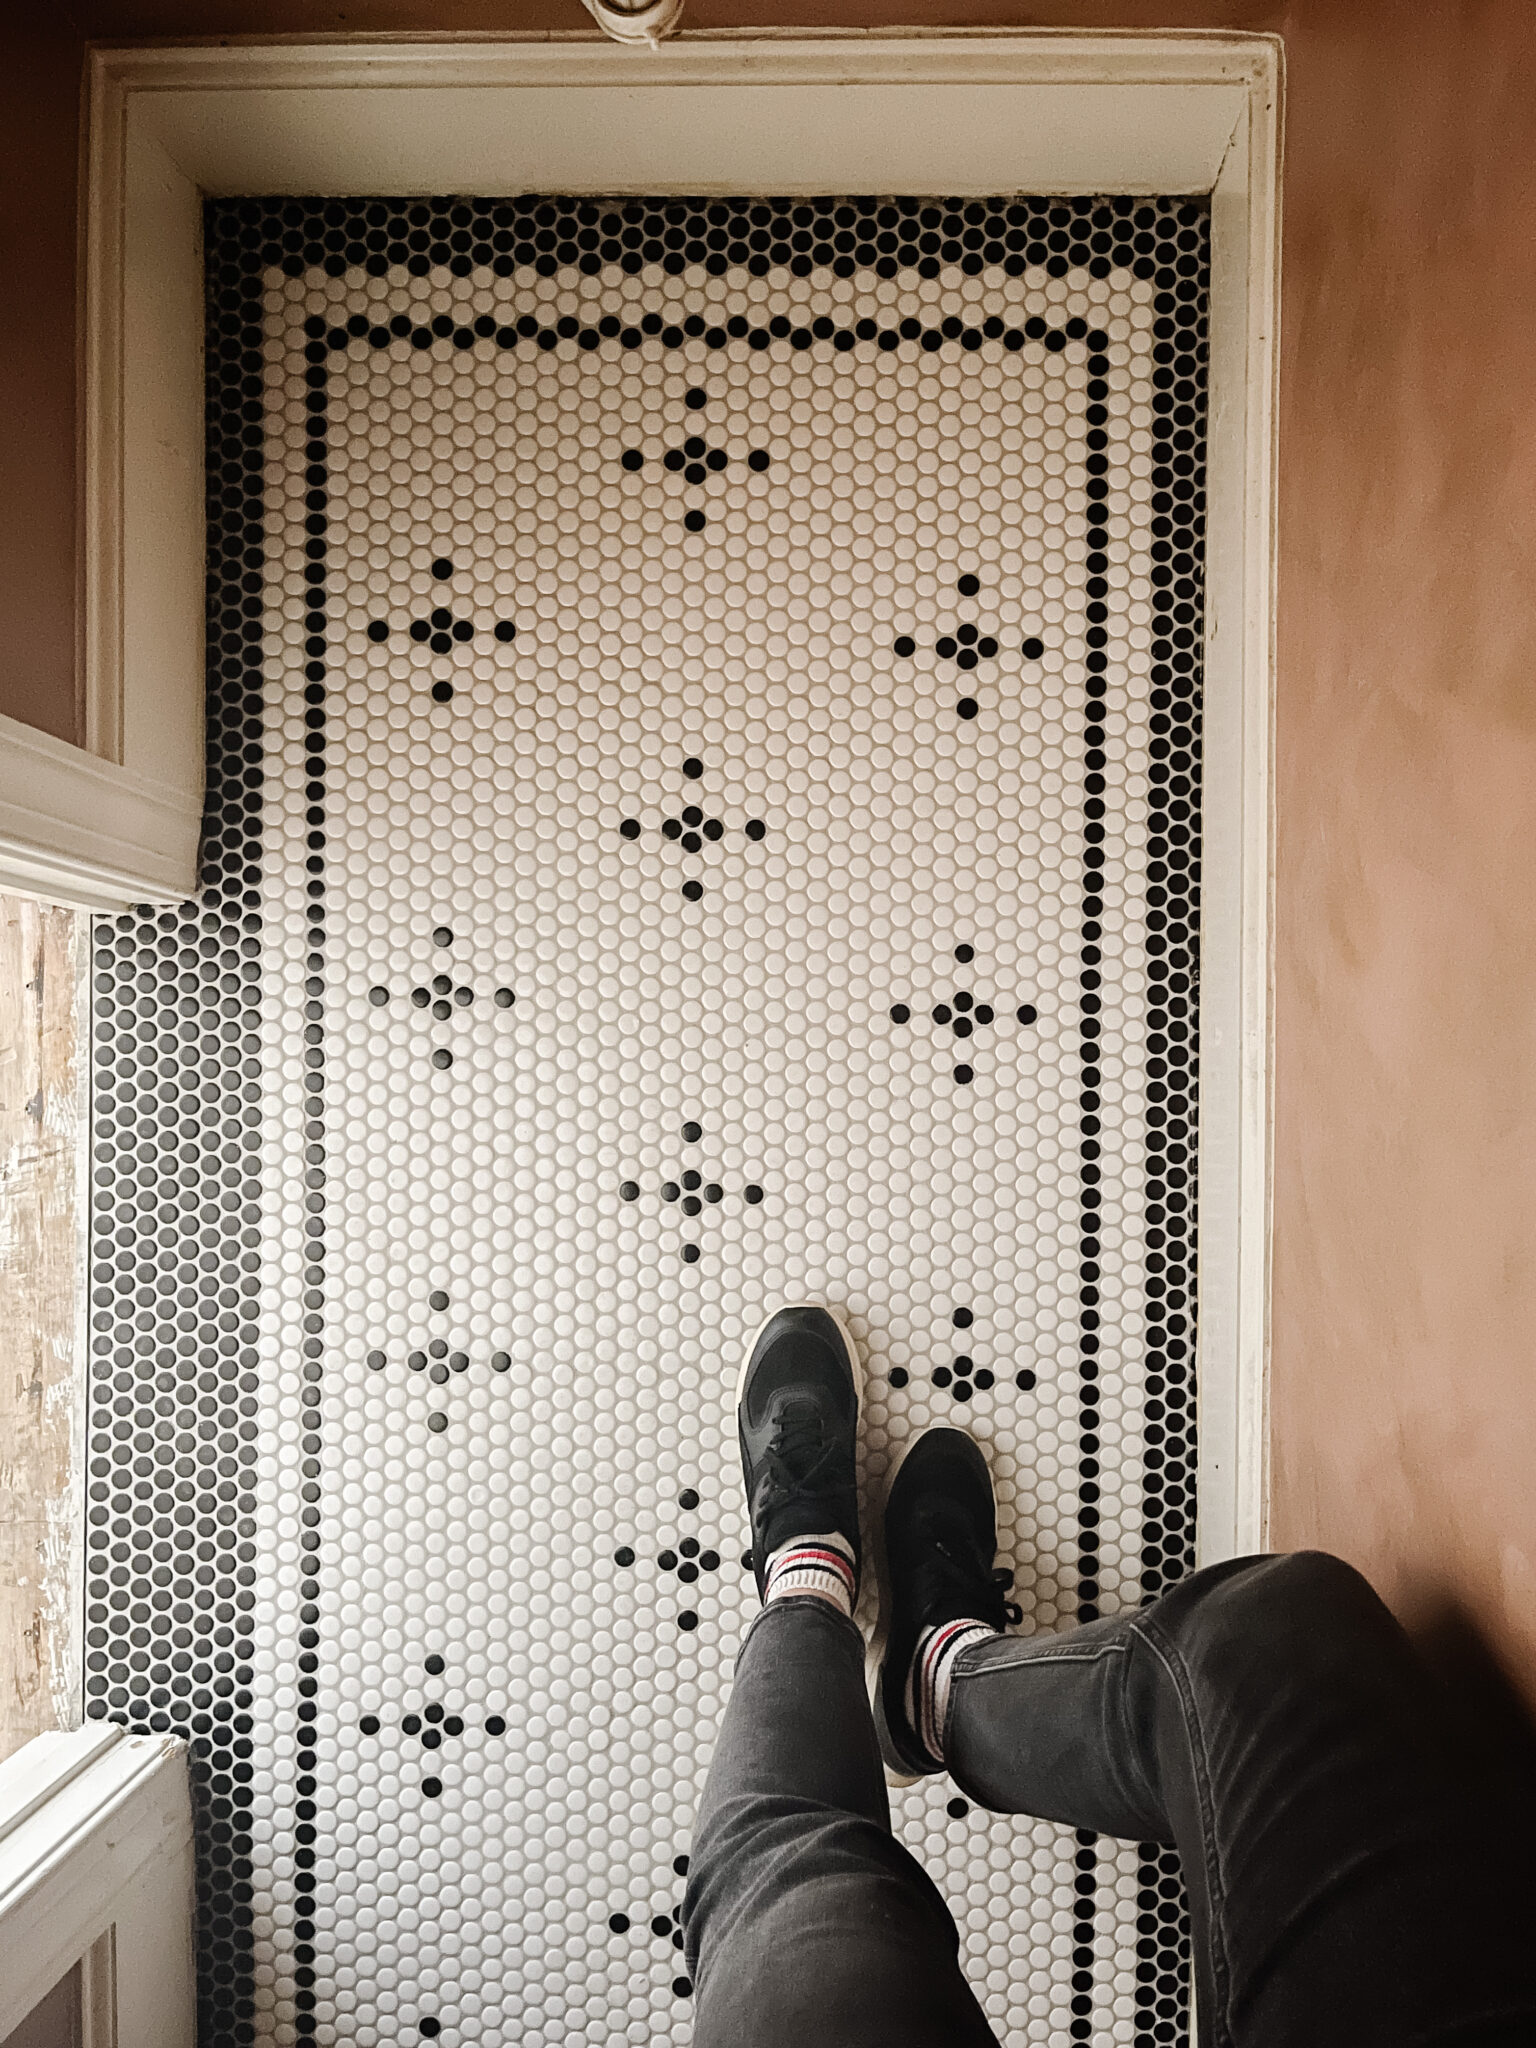 Diy Your Own Penny Tile Patterned Floor, How To Install Penny Tile On Shower Floor